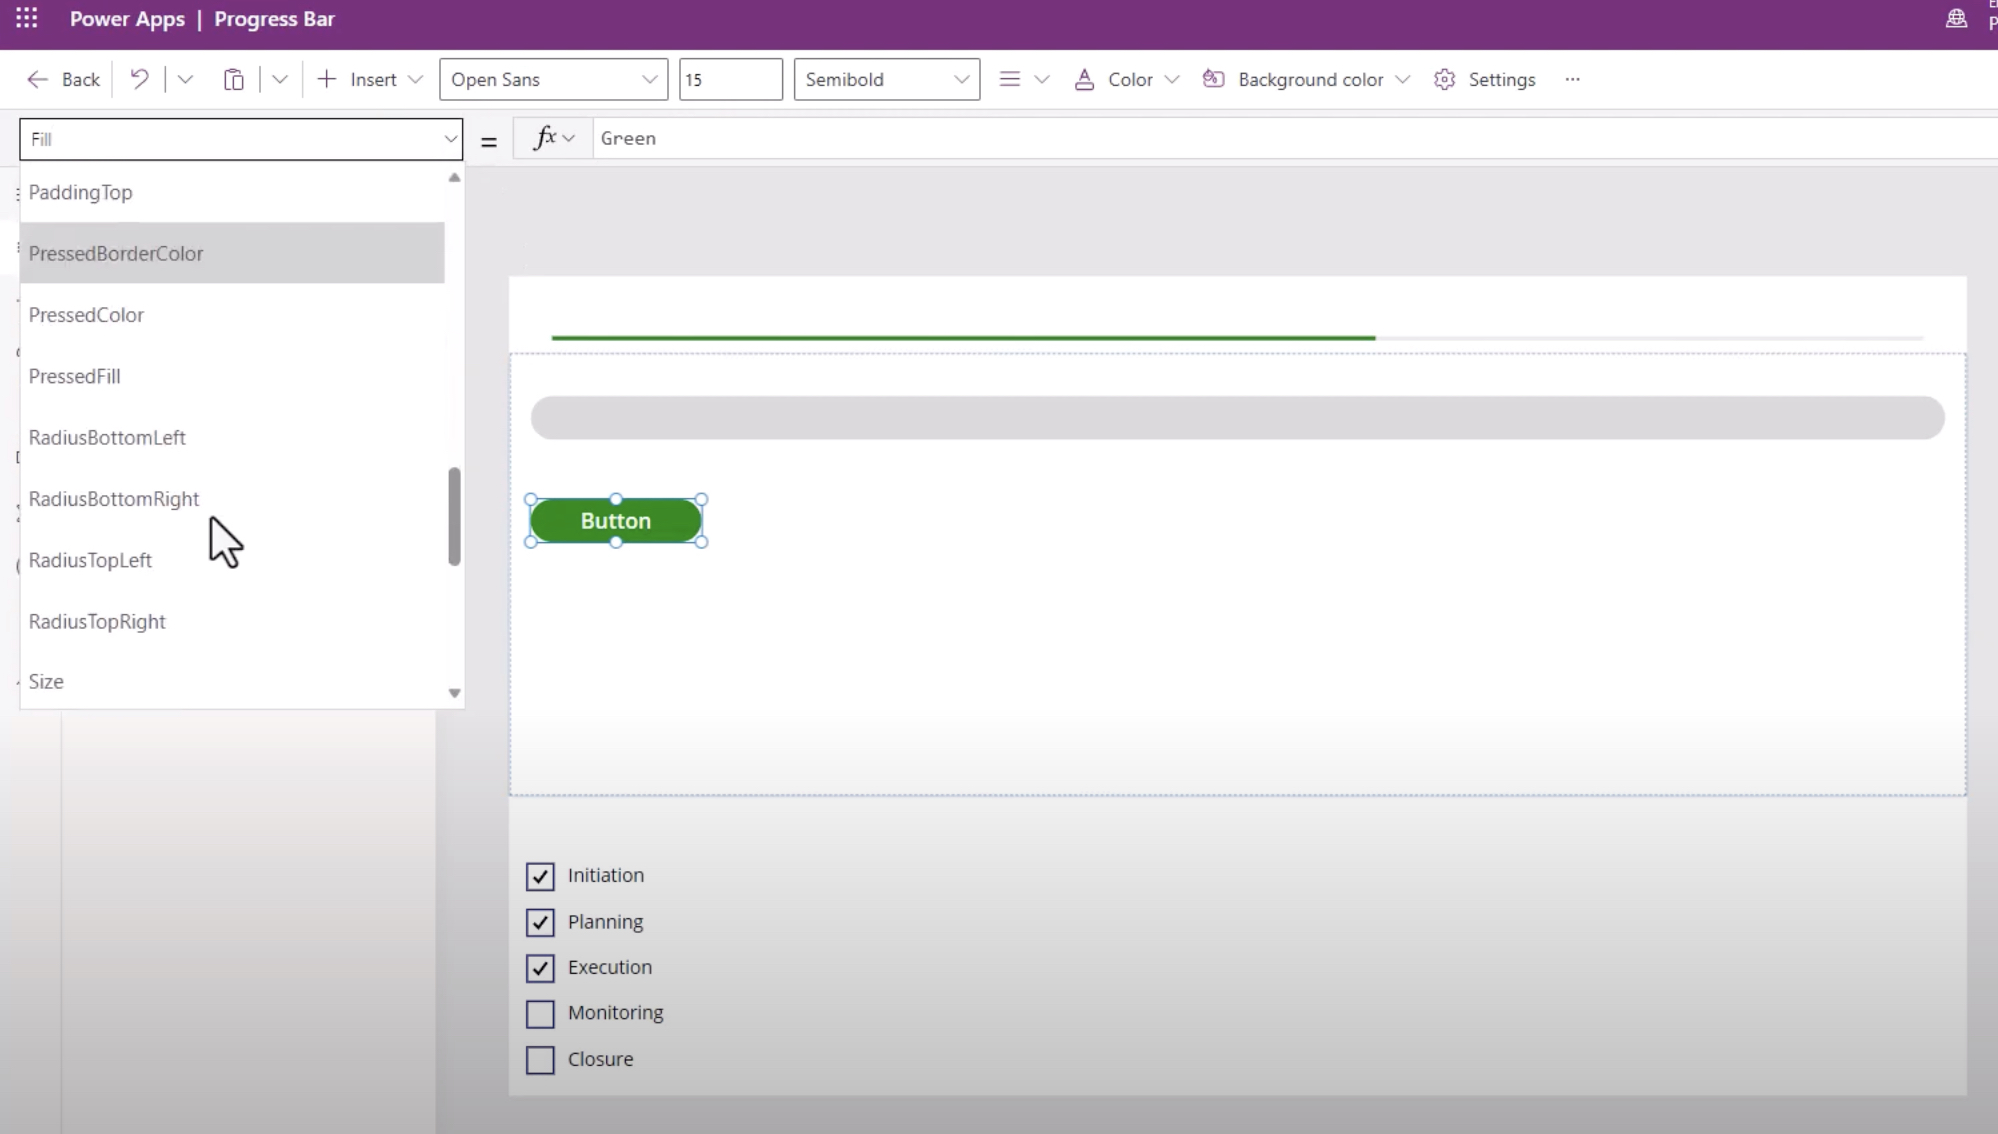 PowerApps for the YouTube Video